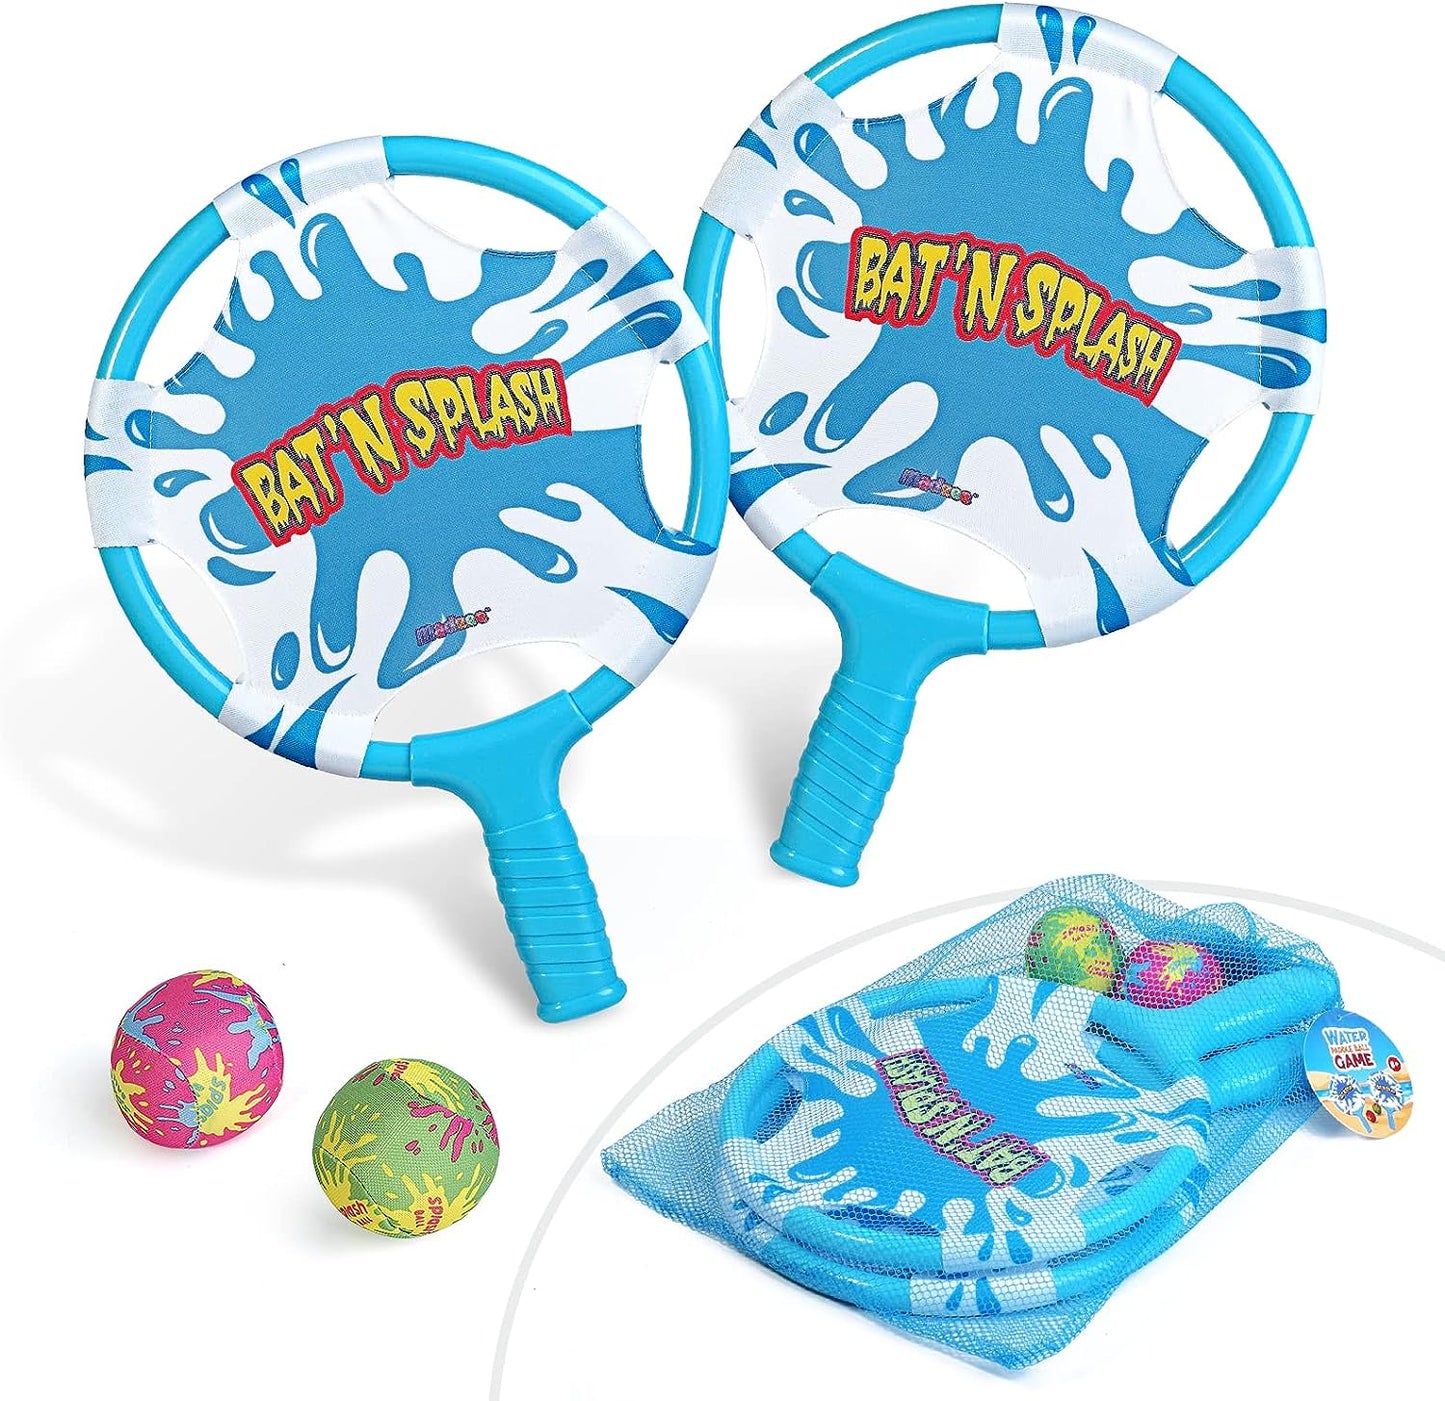 Water Paddle Ball Swimming Pool Game - Fun Pool Games for Adults and Kids - Beach Games for Family Fun.